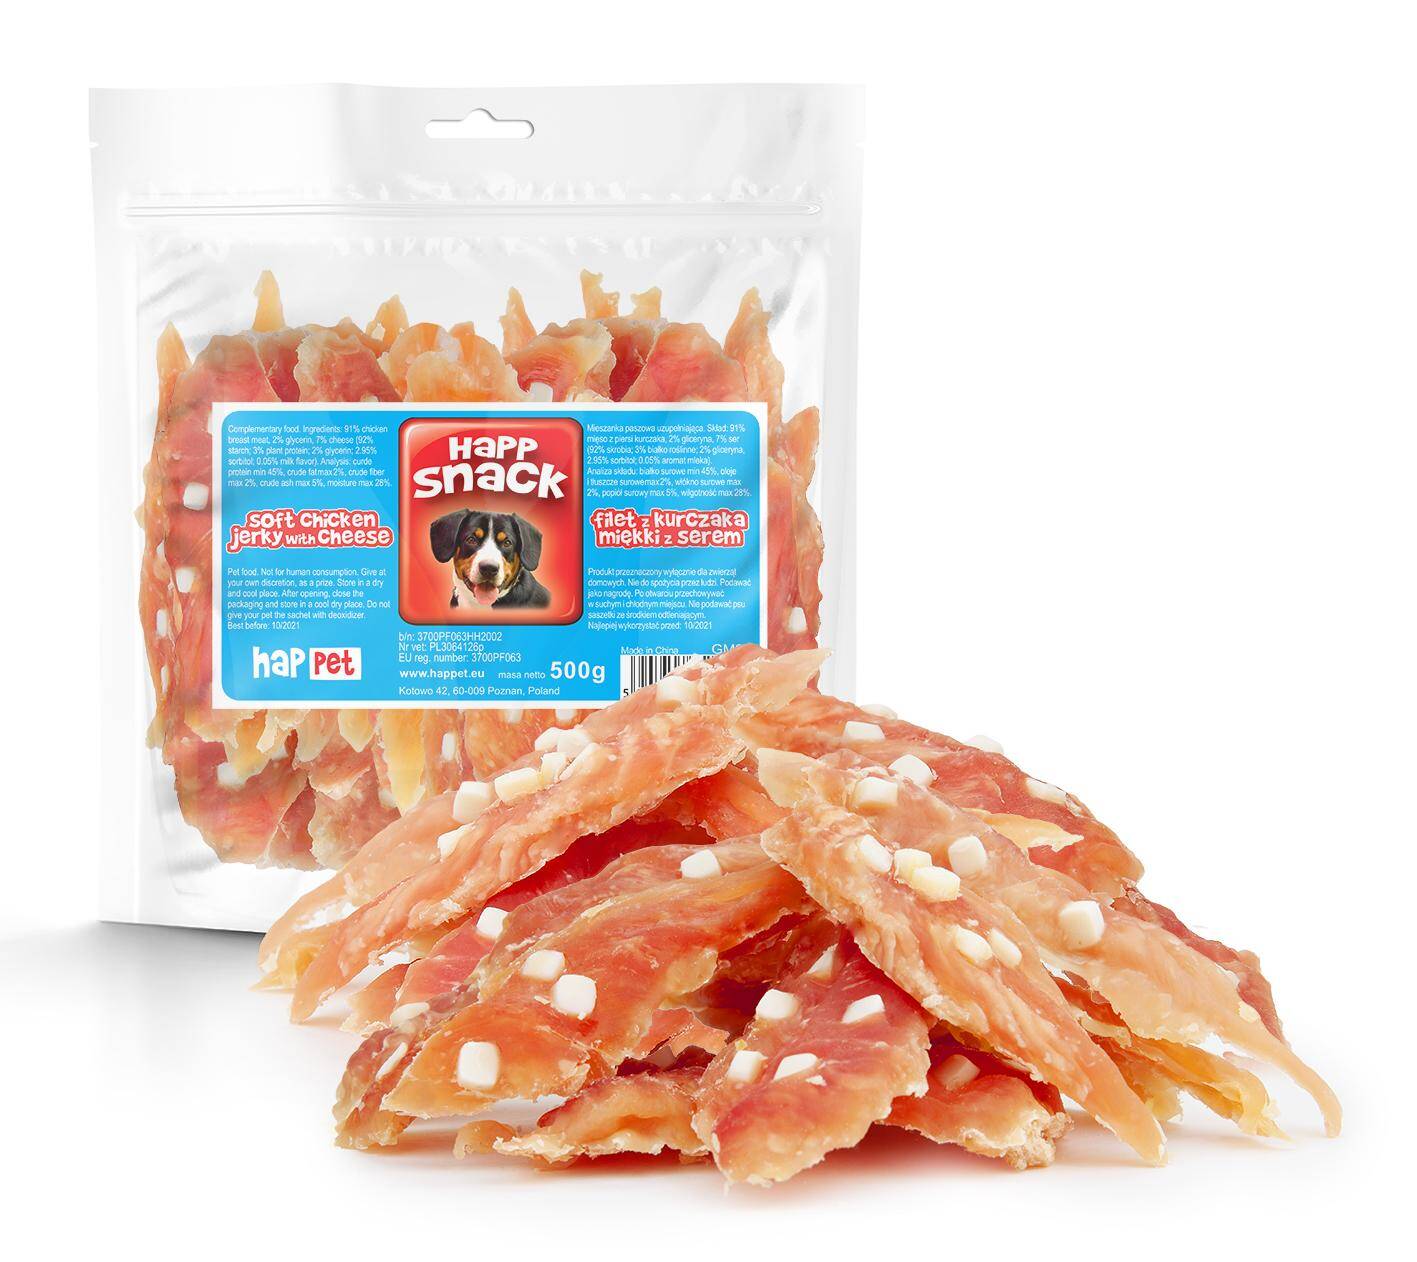 Soft chicken jerky with cheese - Happet GM34 - 500g